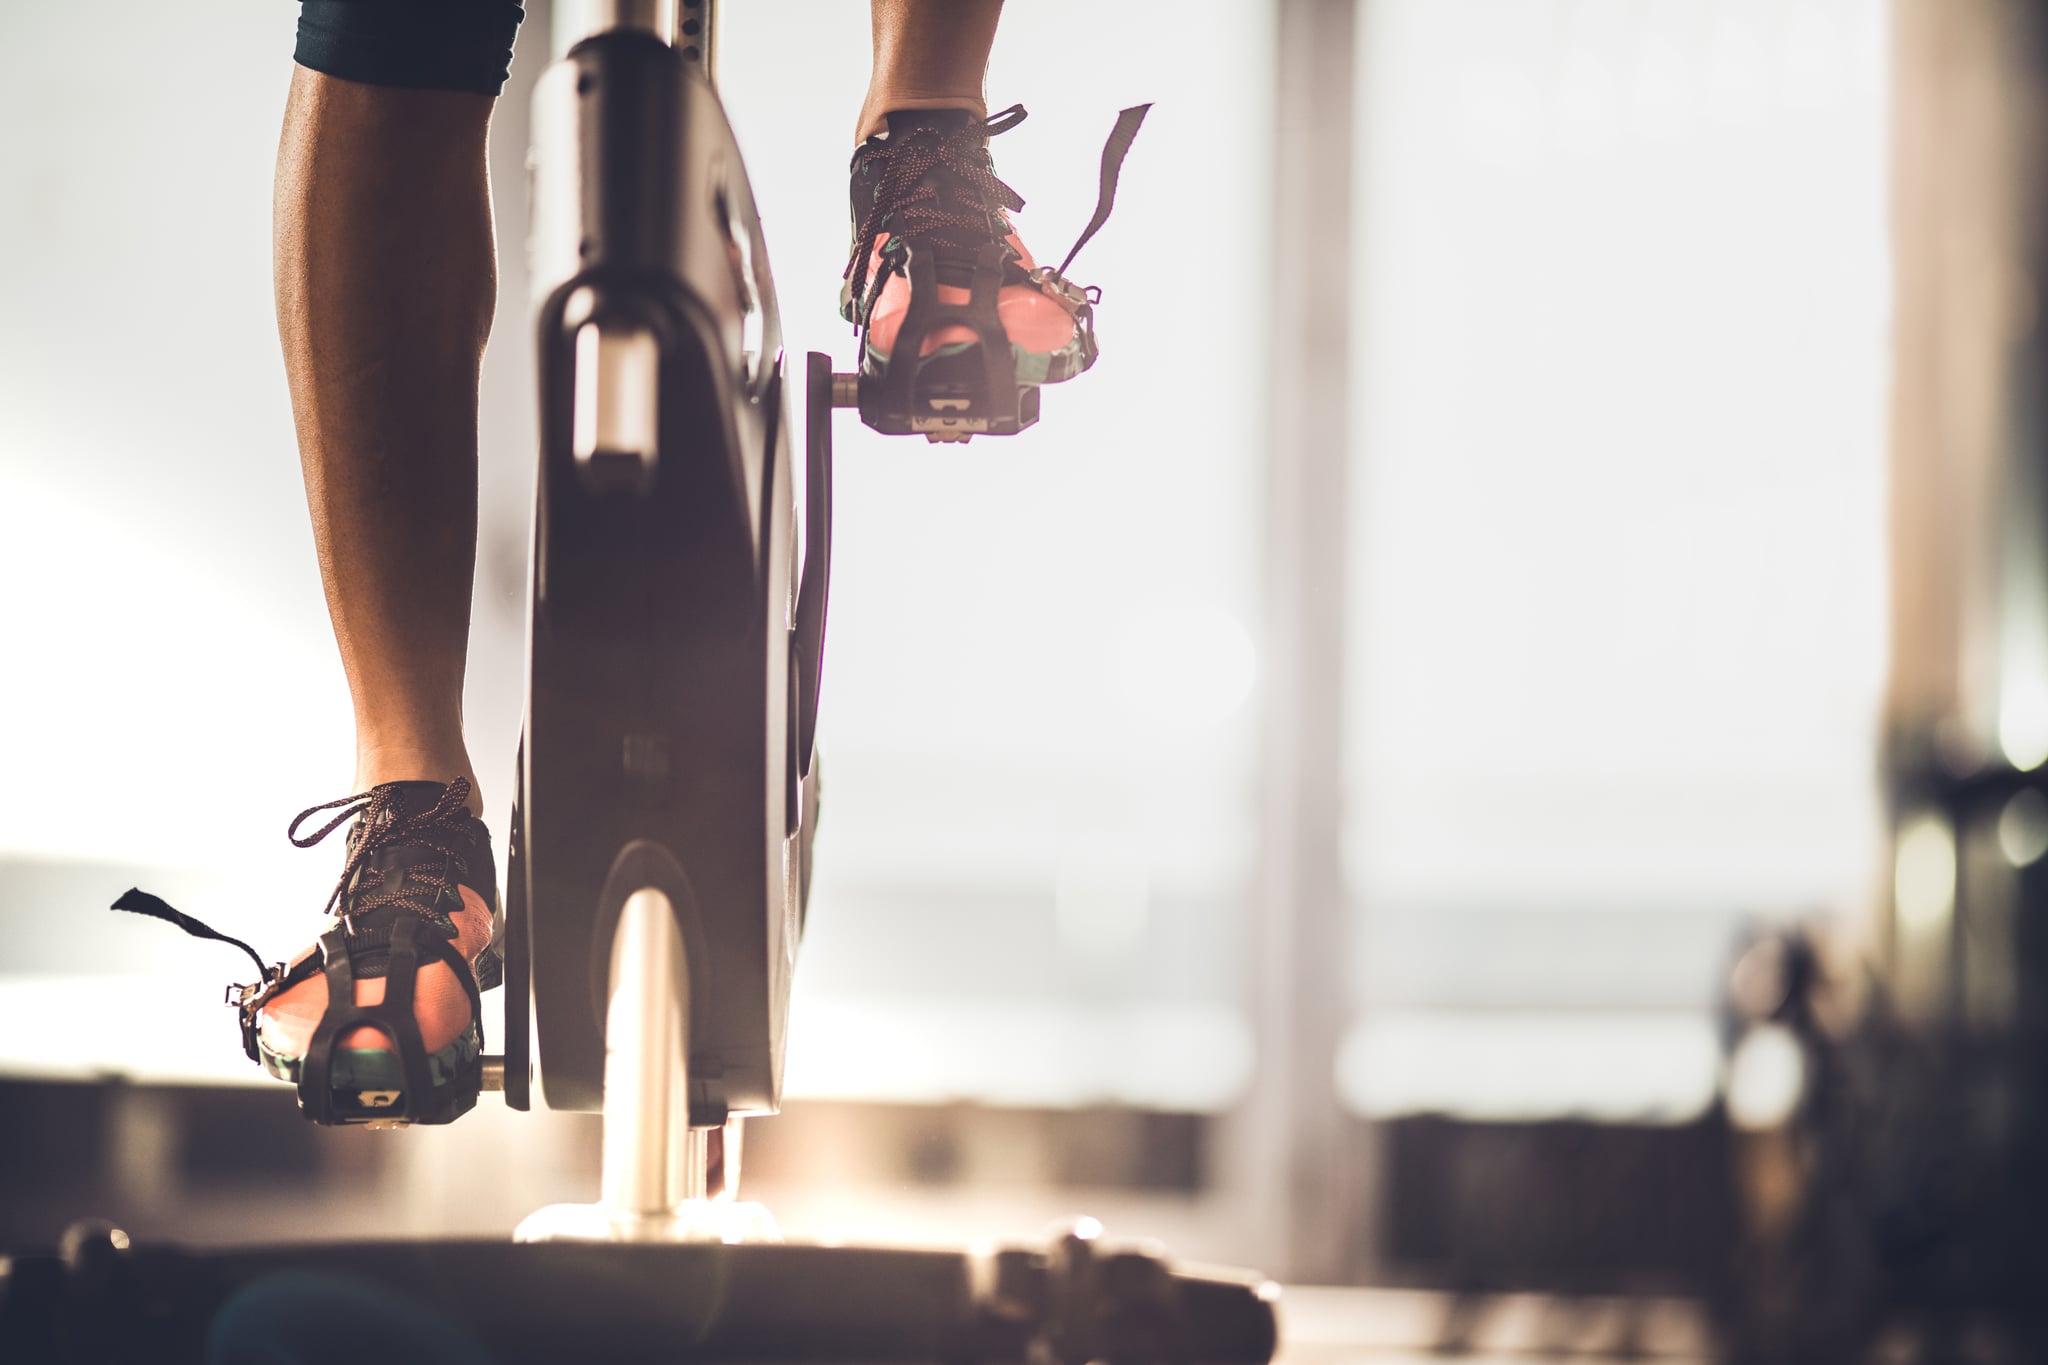 <p>It's another cardio day! Again, you can choose the type of cardio you want to do for this gym workout plan, but we also have an idea from Roser in case you're not sure where to start.</p> <p>"Indoor bike workouts are great for your joints and are one of the best ways to get a killer cardio workout," Roser says. To start, warm up for five minutes at a moderate speed and intensity, then move on to intervals. "Amp up your speed so you're going as fast as you can for 30 seconds, then recover for one minute, then back to a spin sprint for 30 seconds," she explains. "Try sticking to this pattern for the next 25 minutes, then cool down for five minutes at the speed of your recovery pace." Or, try one of <a href="https://www.popsugar.com/fitness/best-cycling-workouts-on-youtube-48031524" class="ga-track">these indoor cycling workouts</a>.</p>